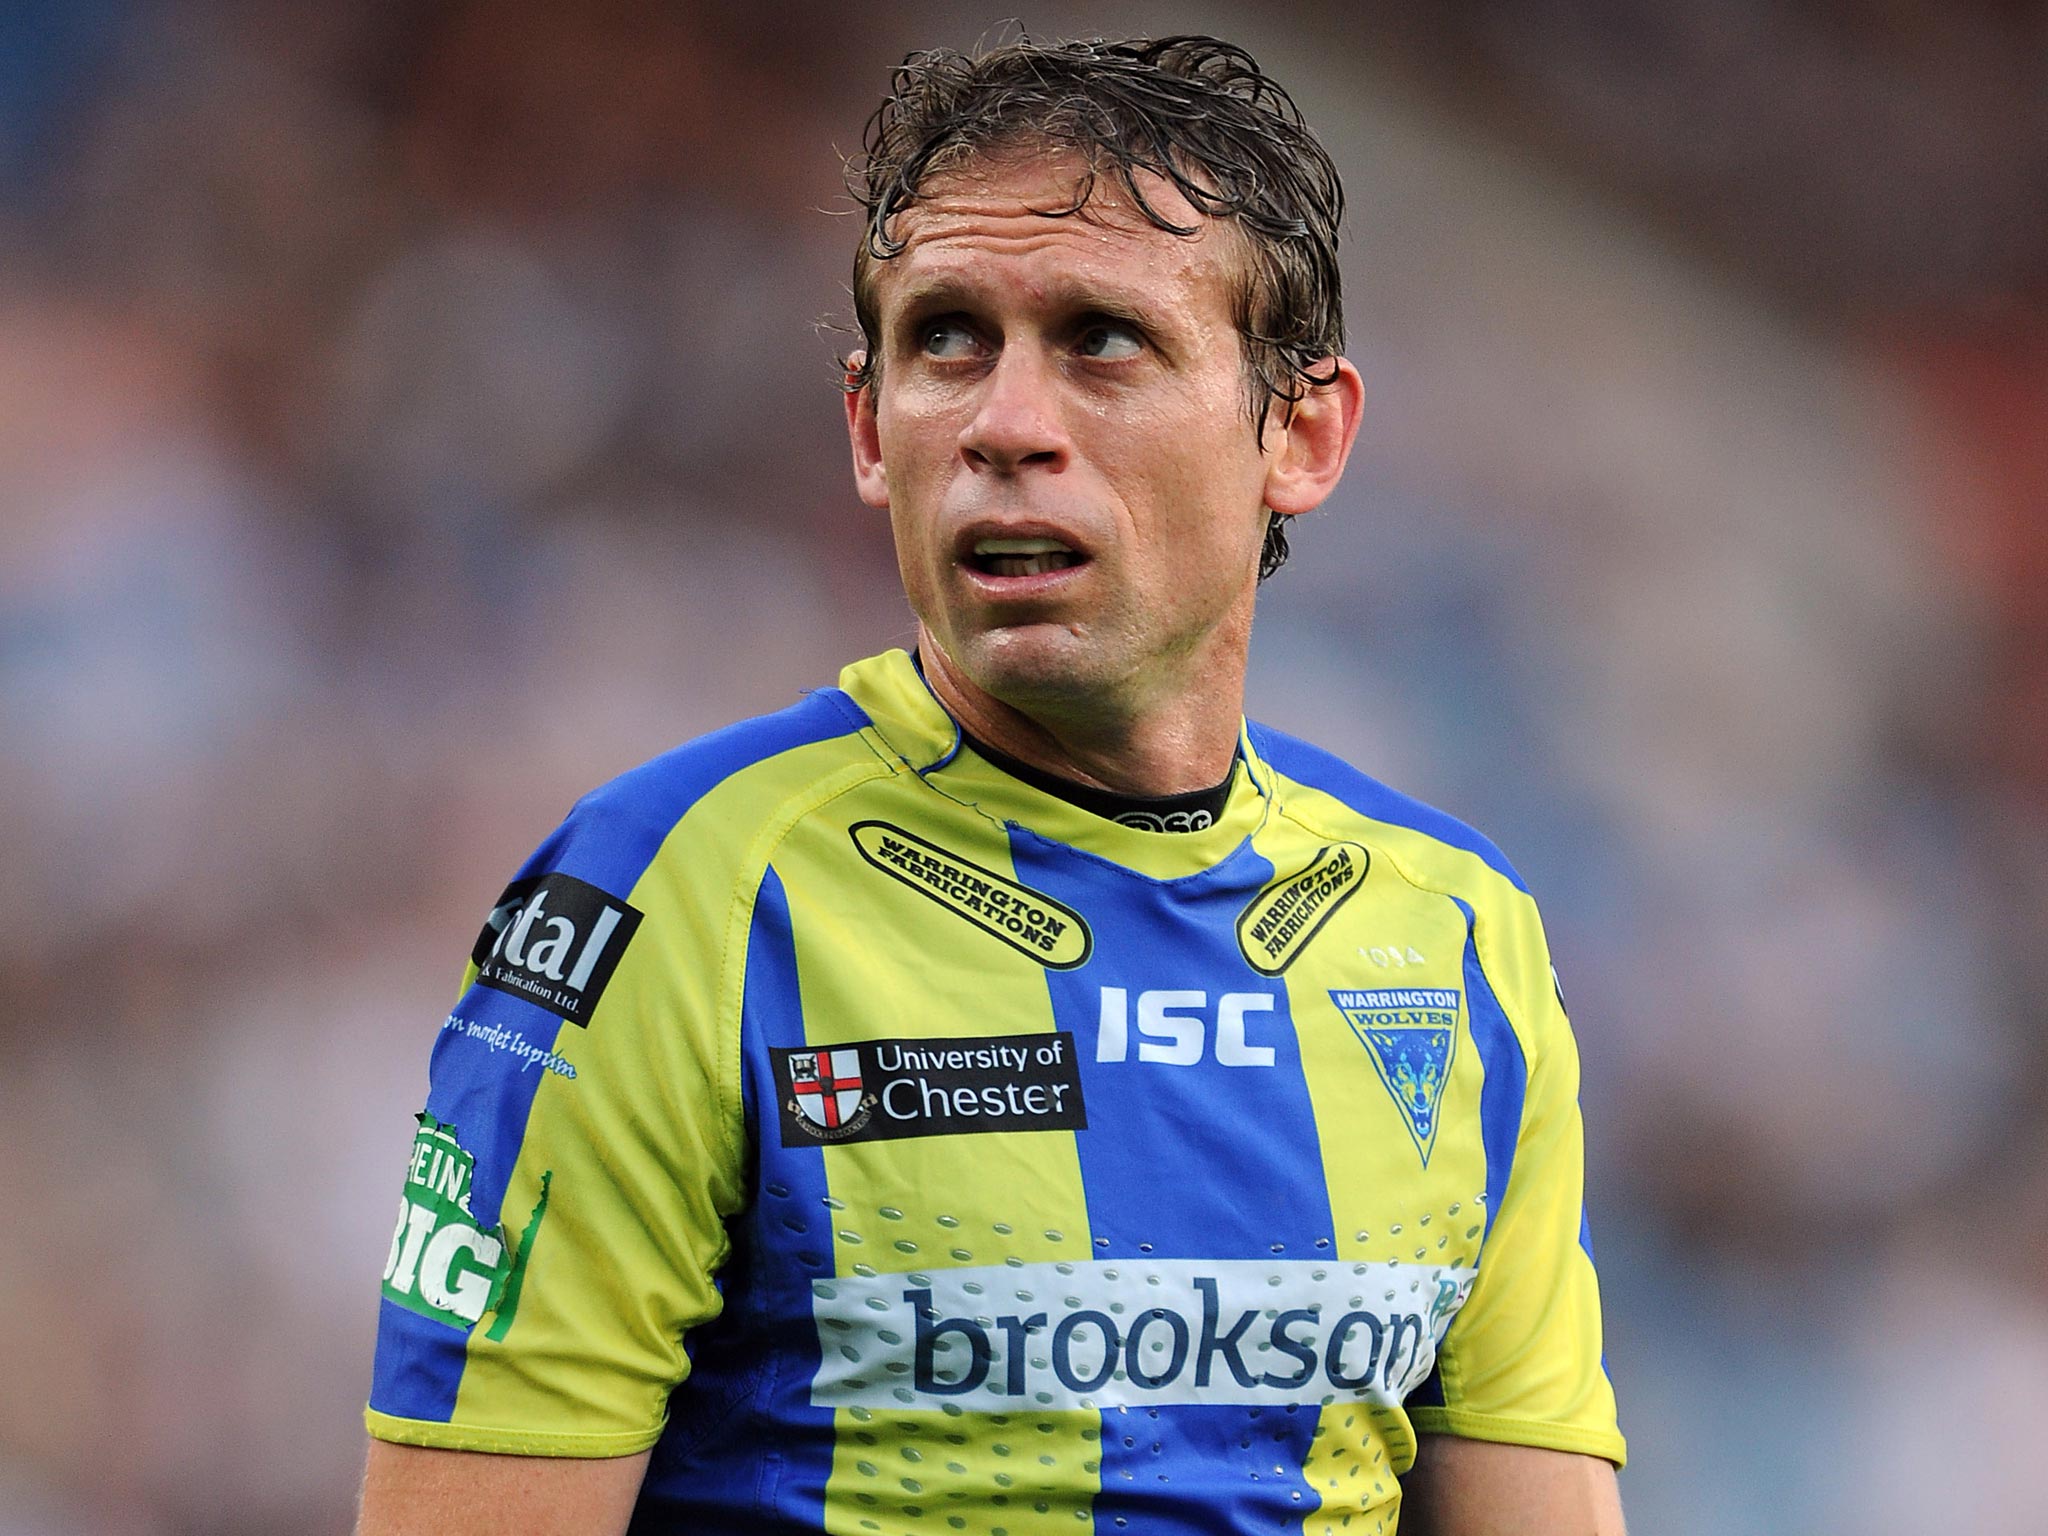 Brett Hodgson has joined the Widnes Vikings as an assistant coach to Daniel Betts